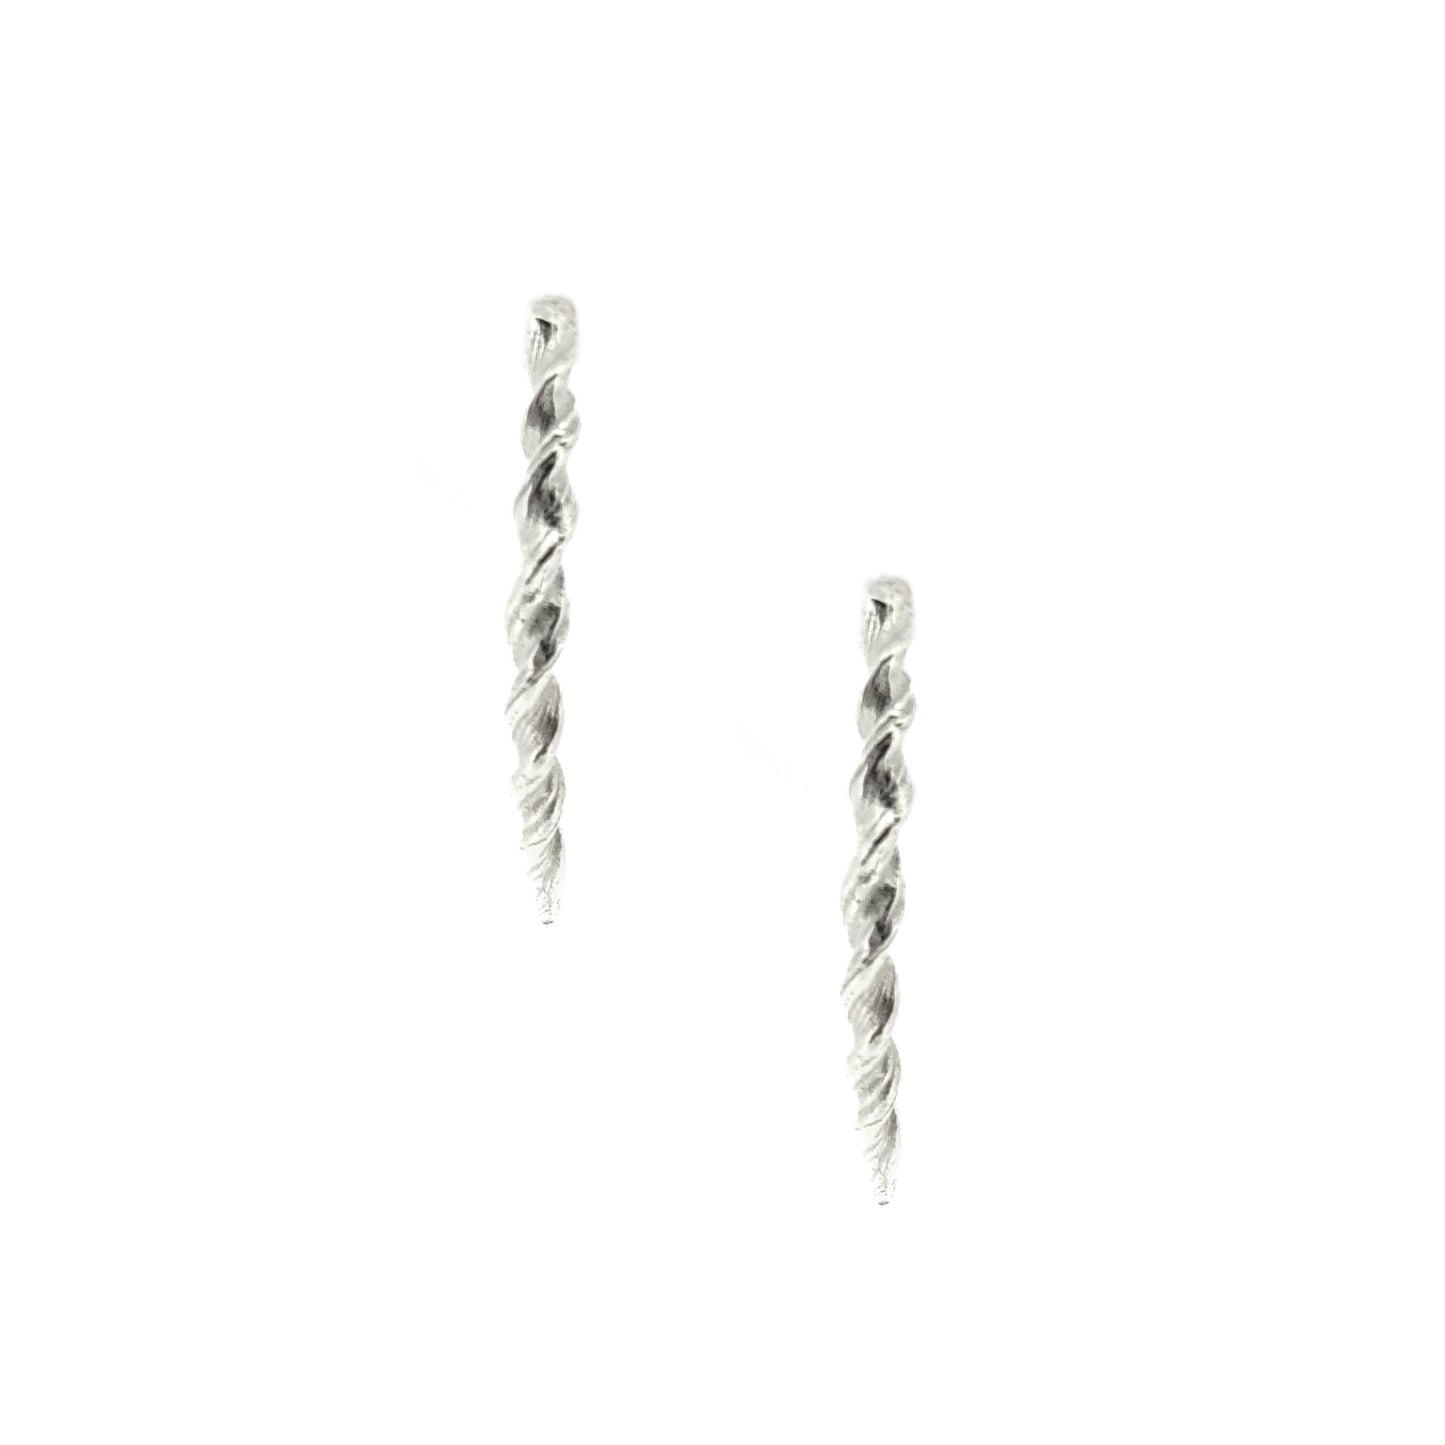 Silver twist curved drop earrings with post fitting.